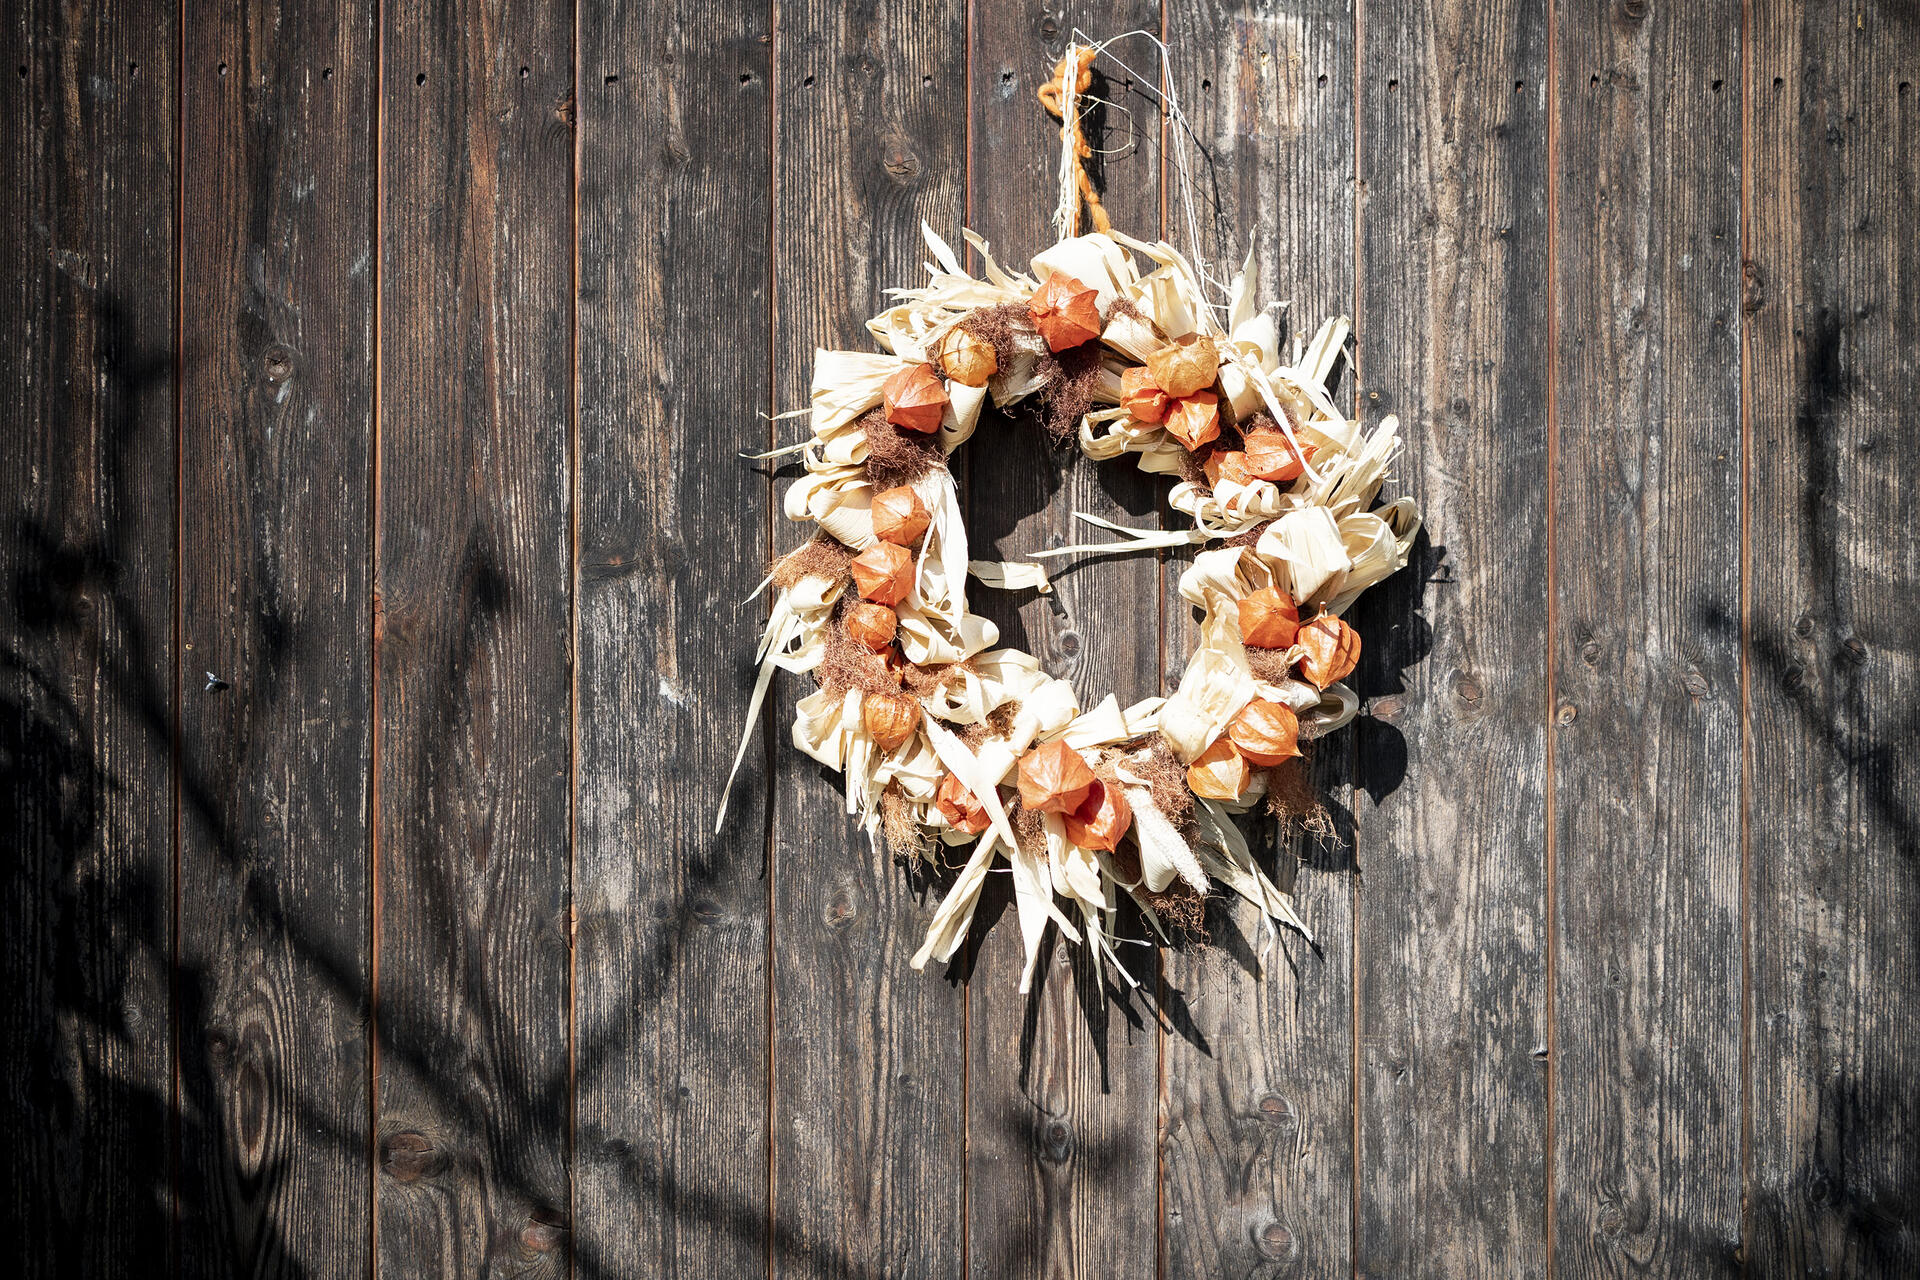 Wreath on the shed wall